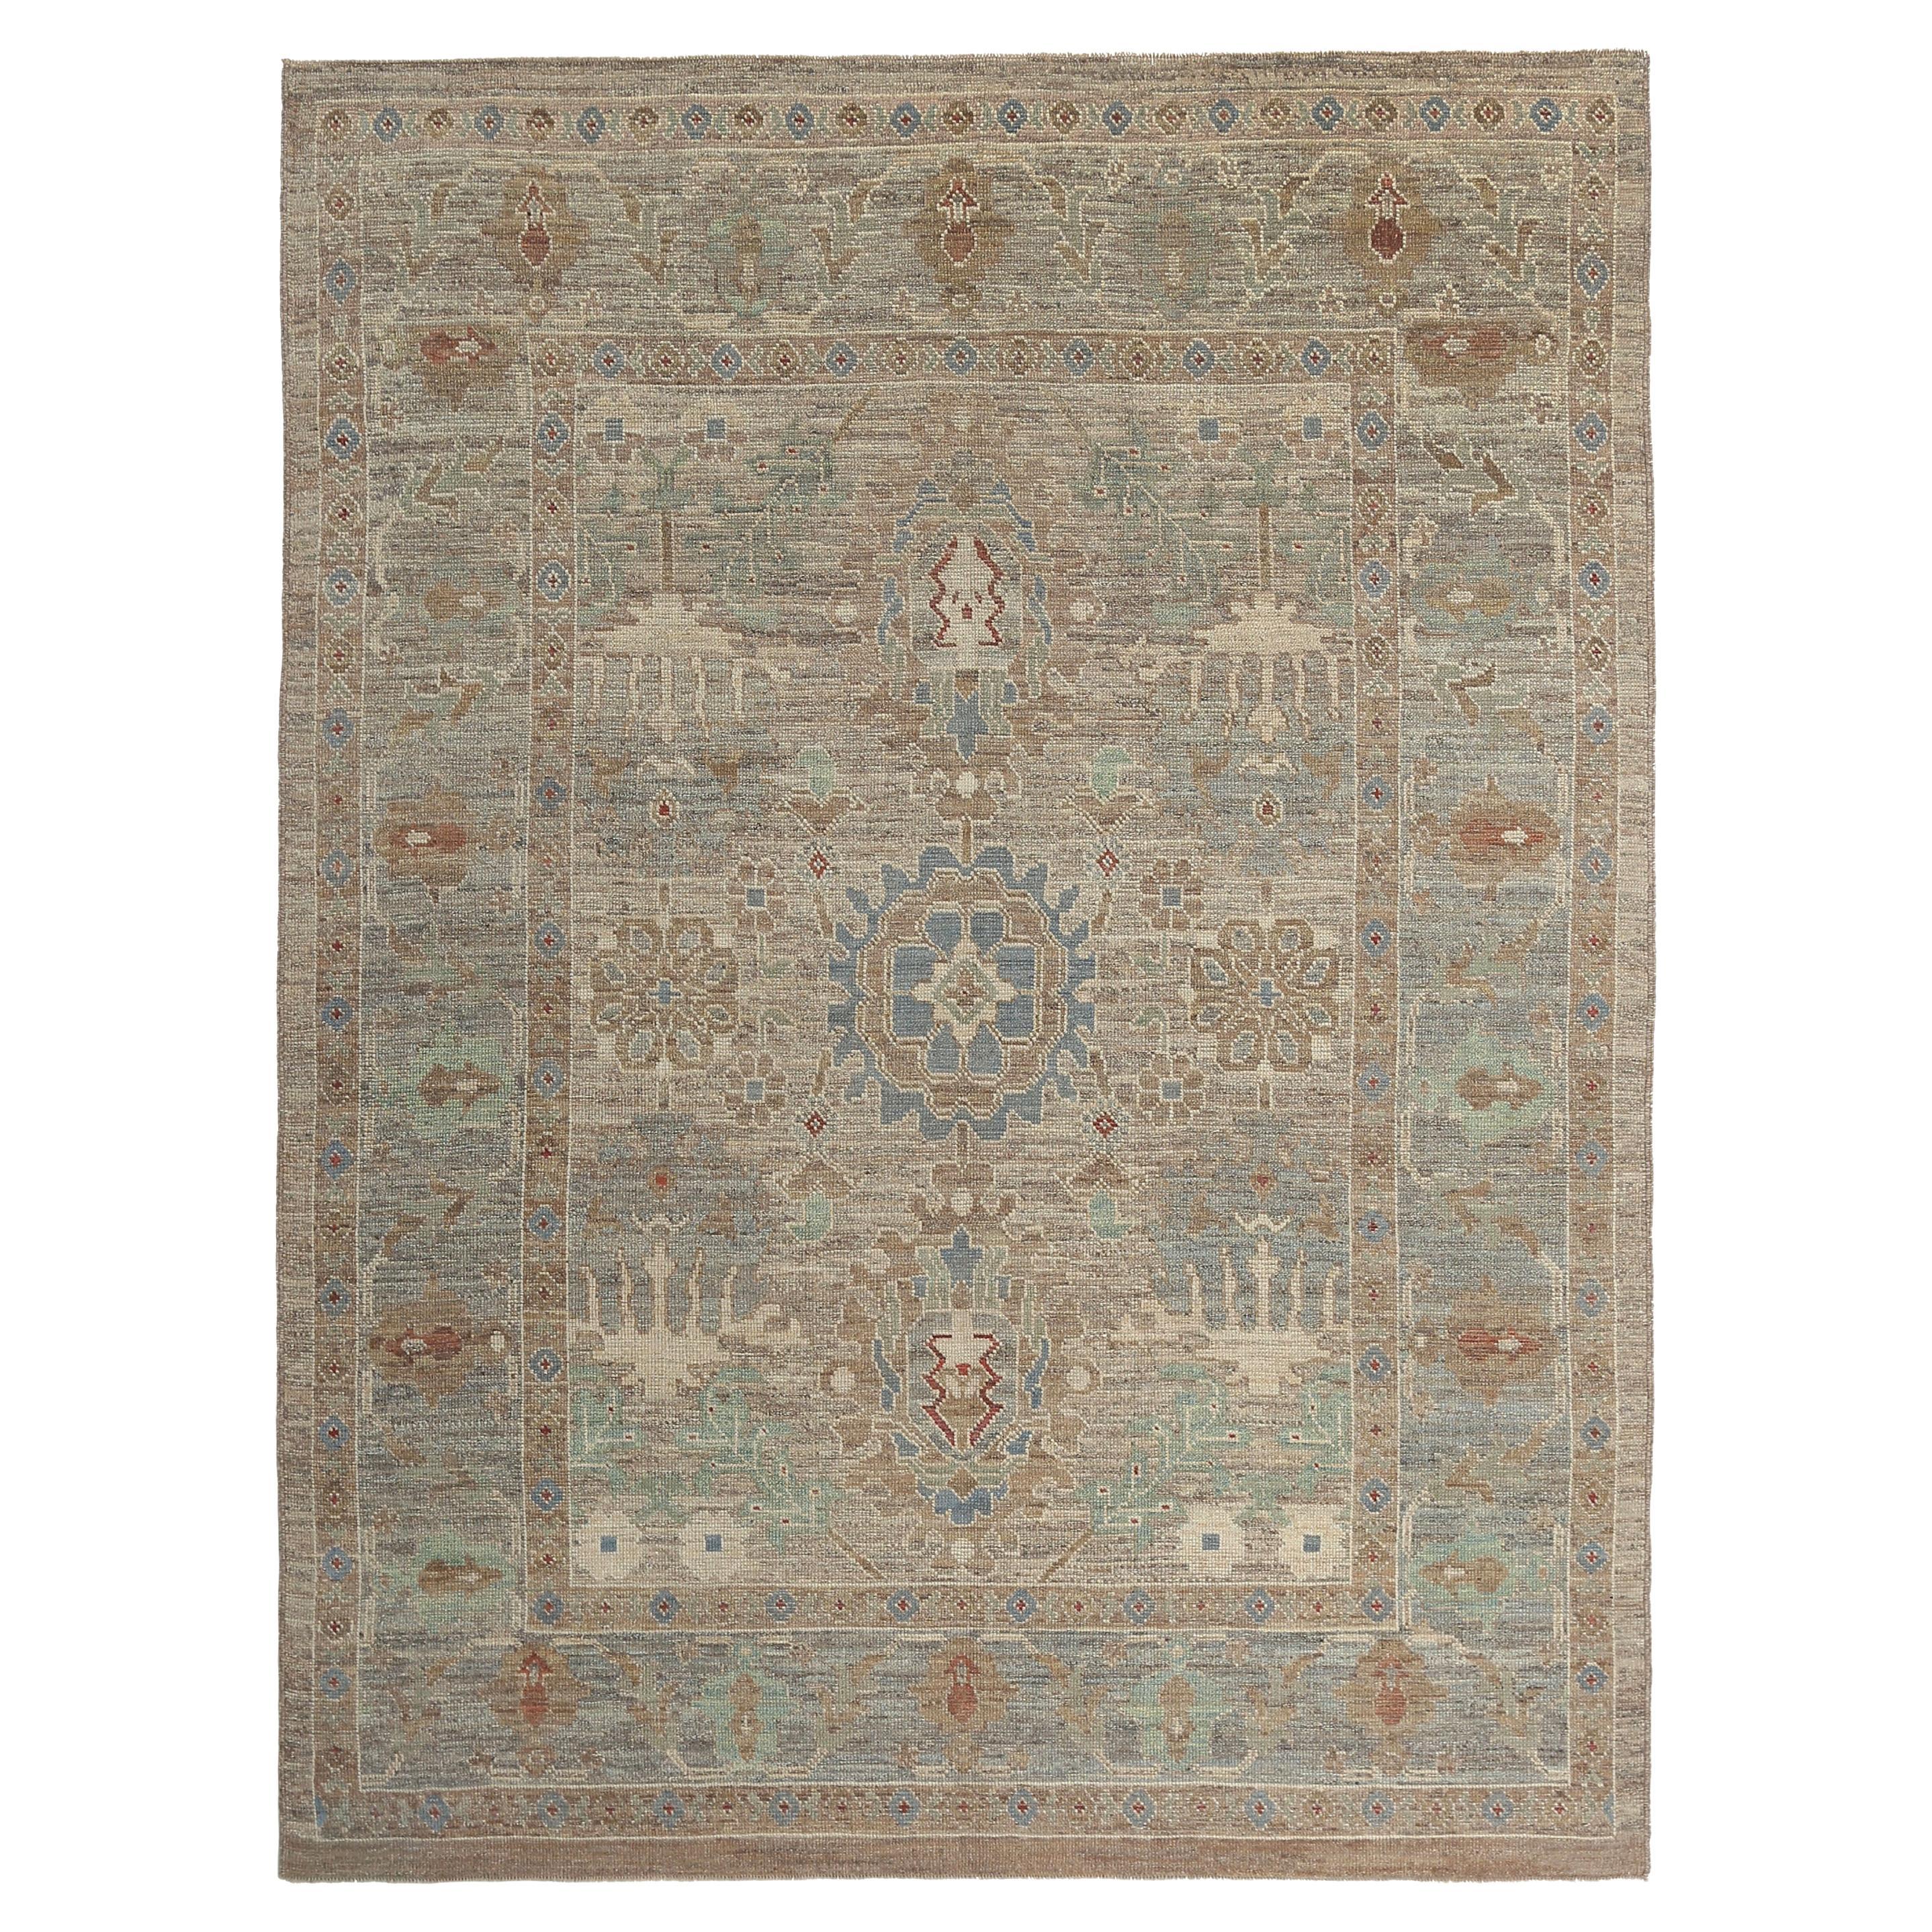 Light Brown Turkish Oushak with Blue Tones